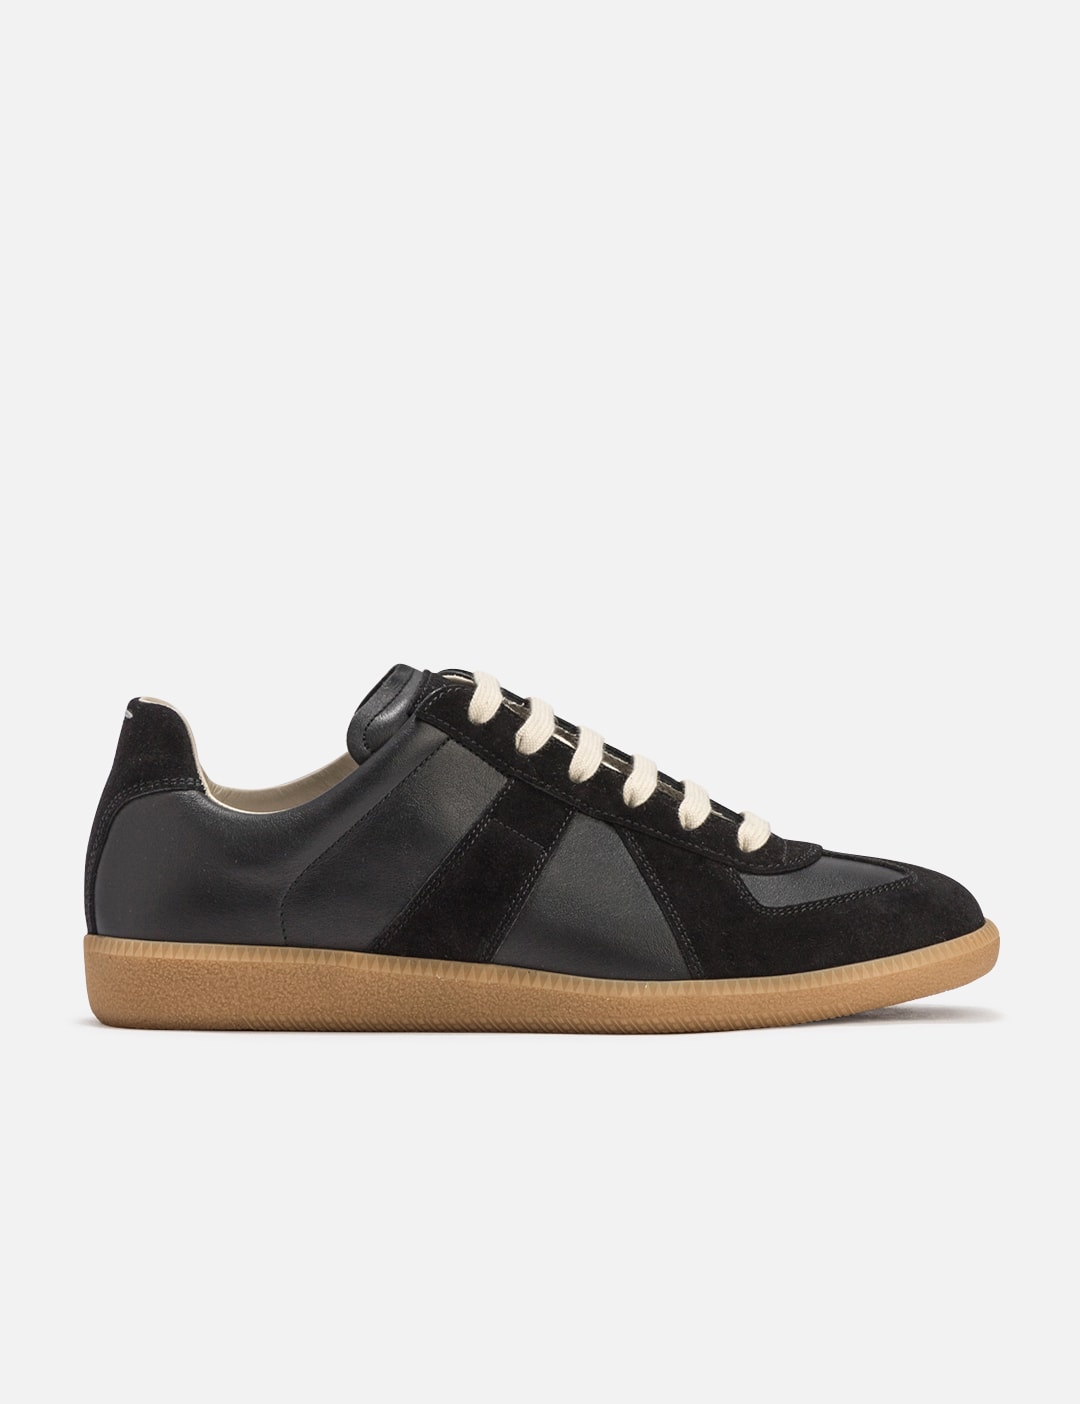 Maison Margiela - Replica Sneakers | HBX - Globally Curated Fashion and ...